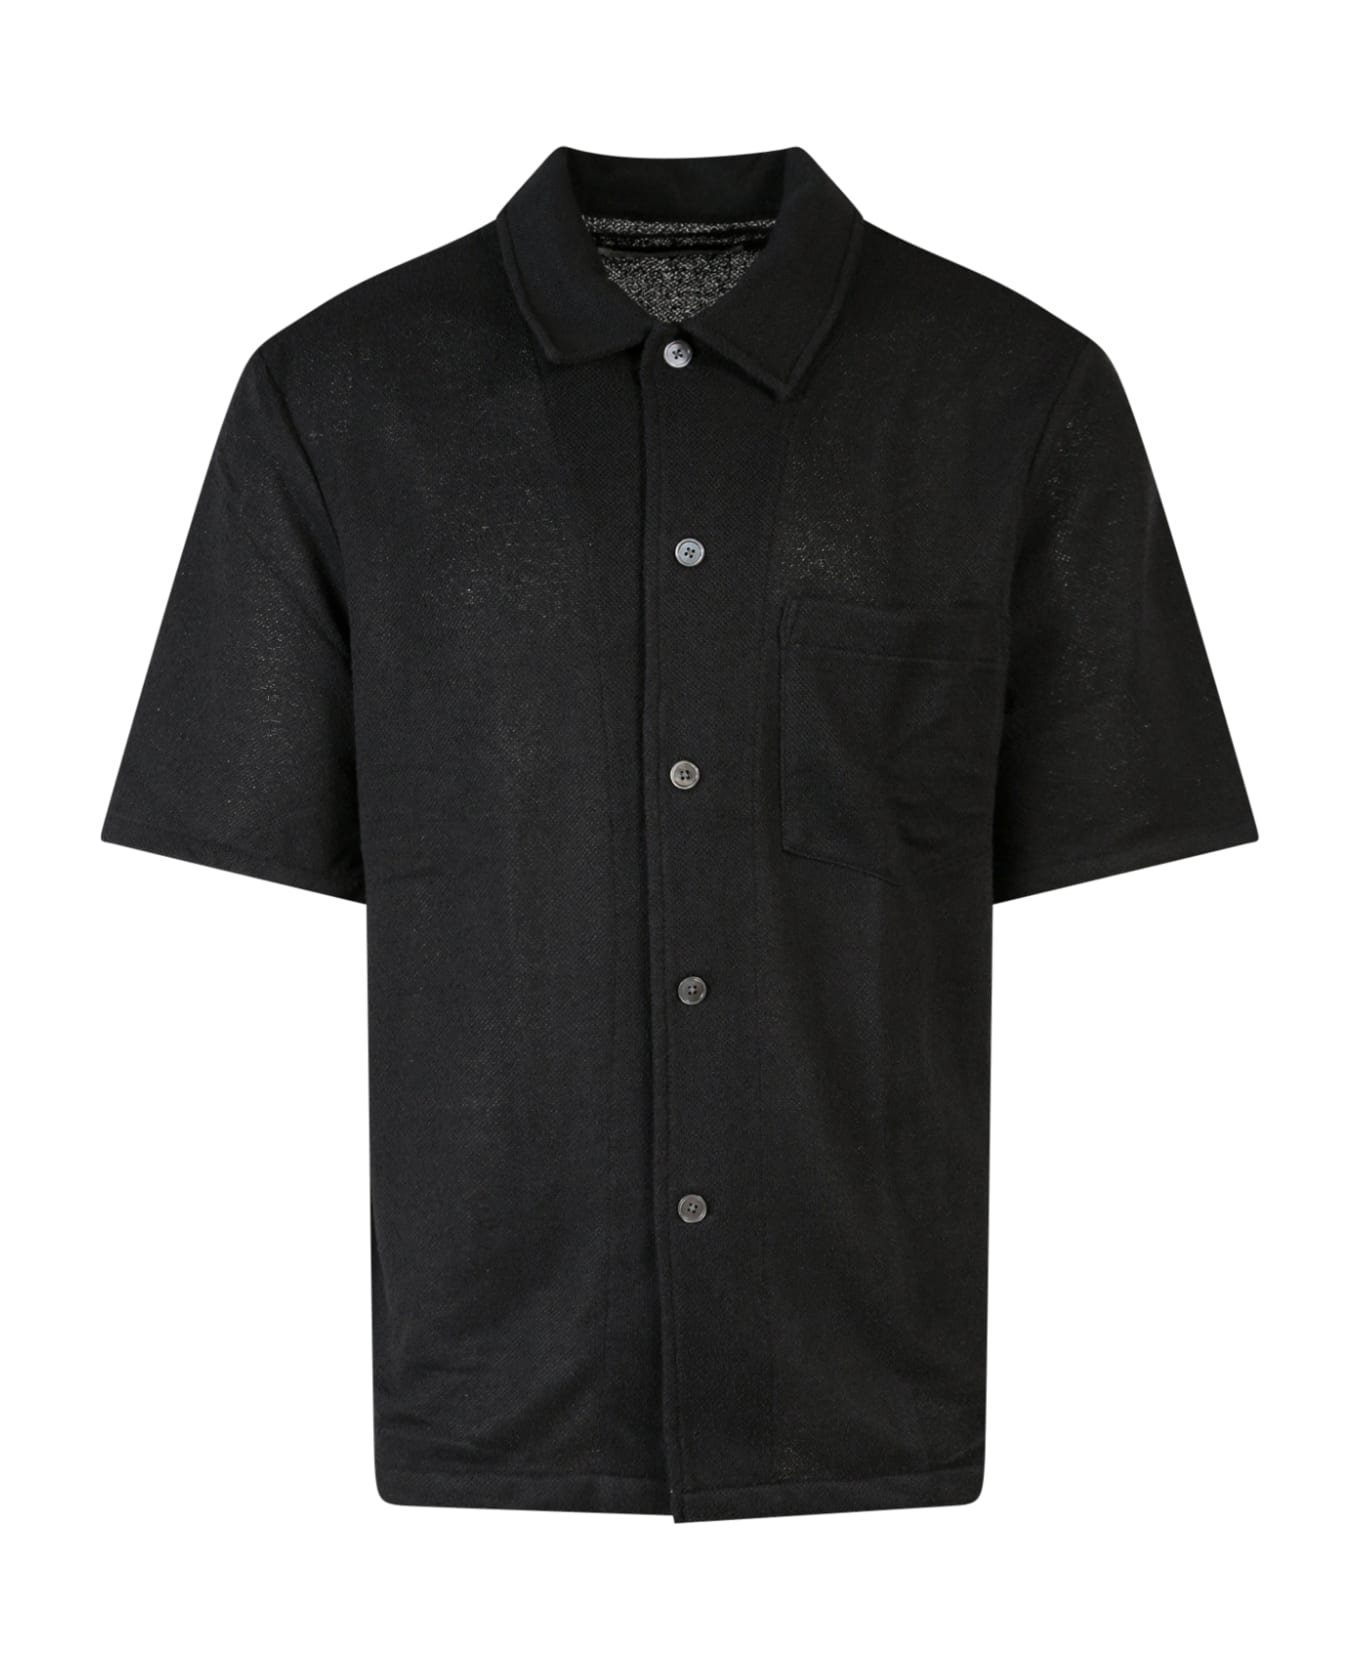 Our Legacy Shirt - Black Boucle